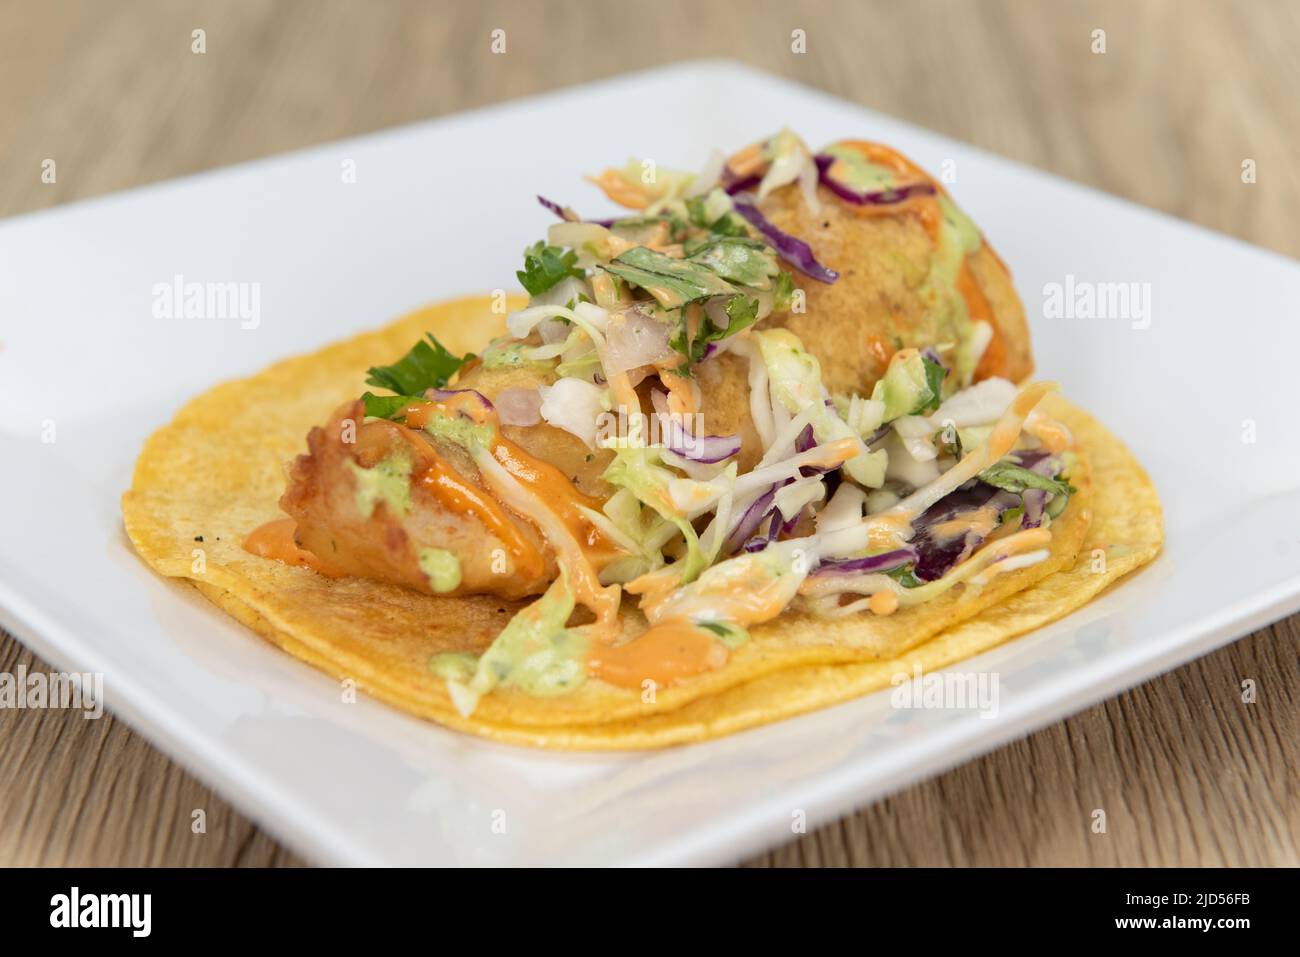 Appetizing fish taco with perfect presentation for a tempting Mexican food delicacy. Stock Photo